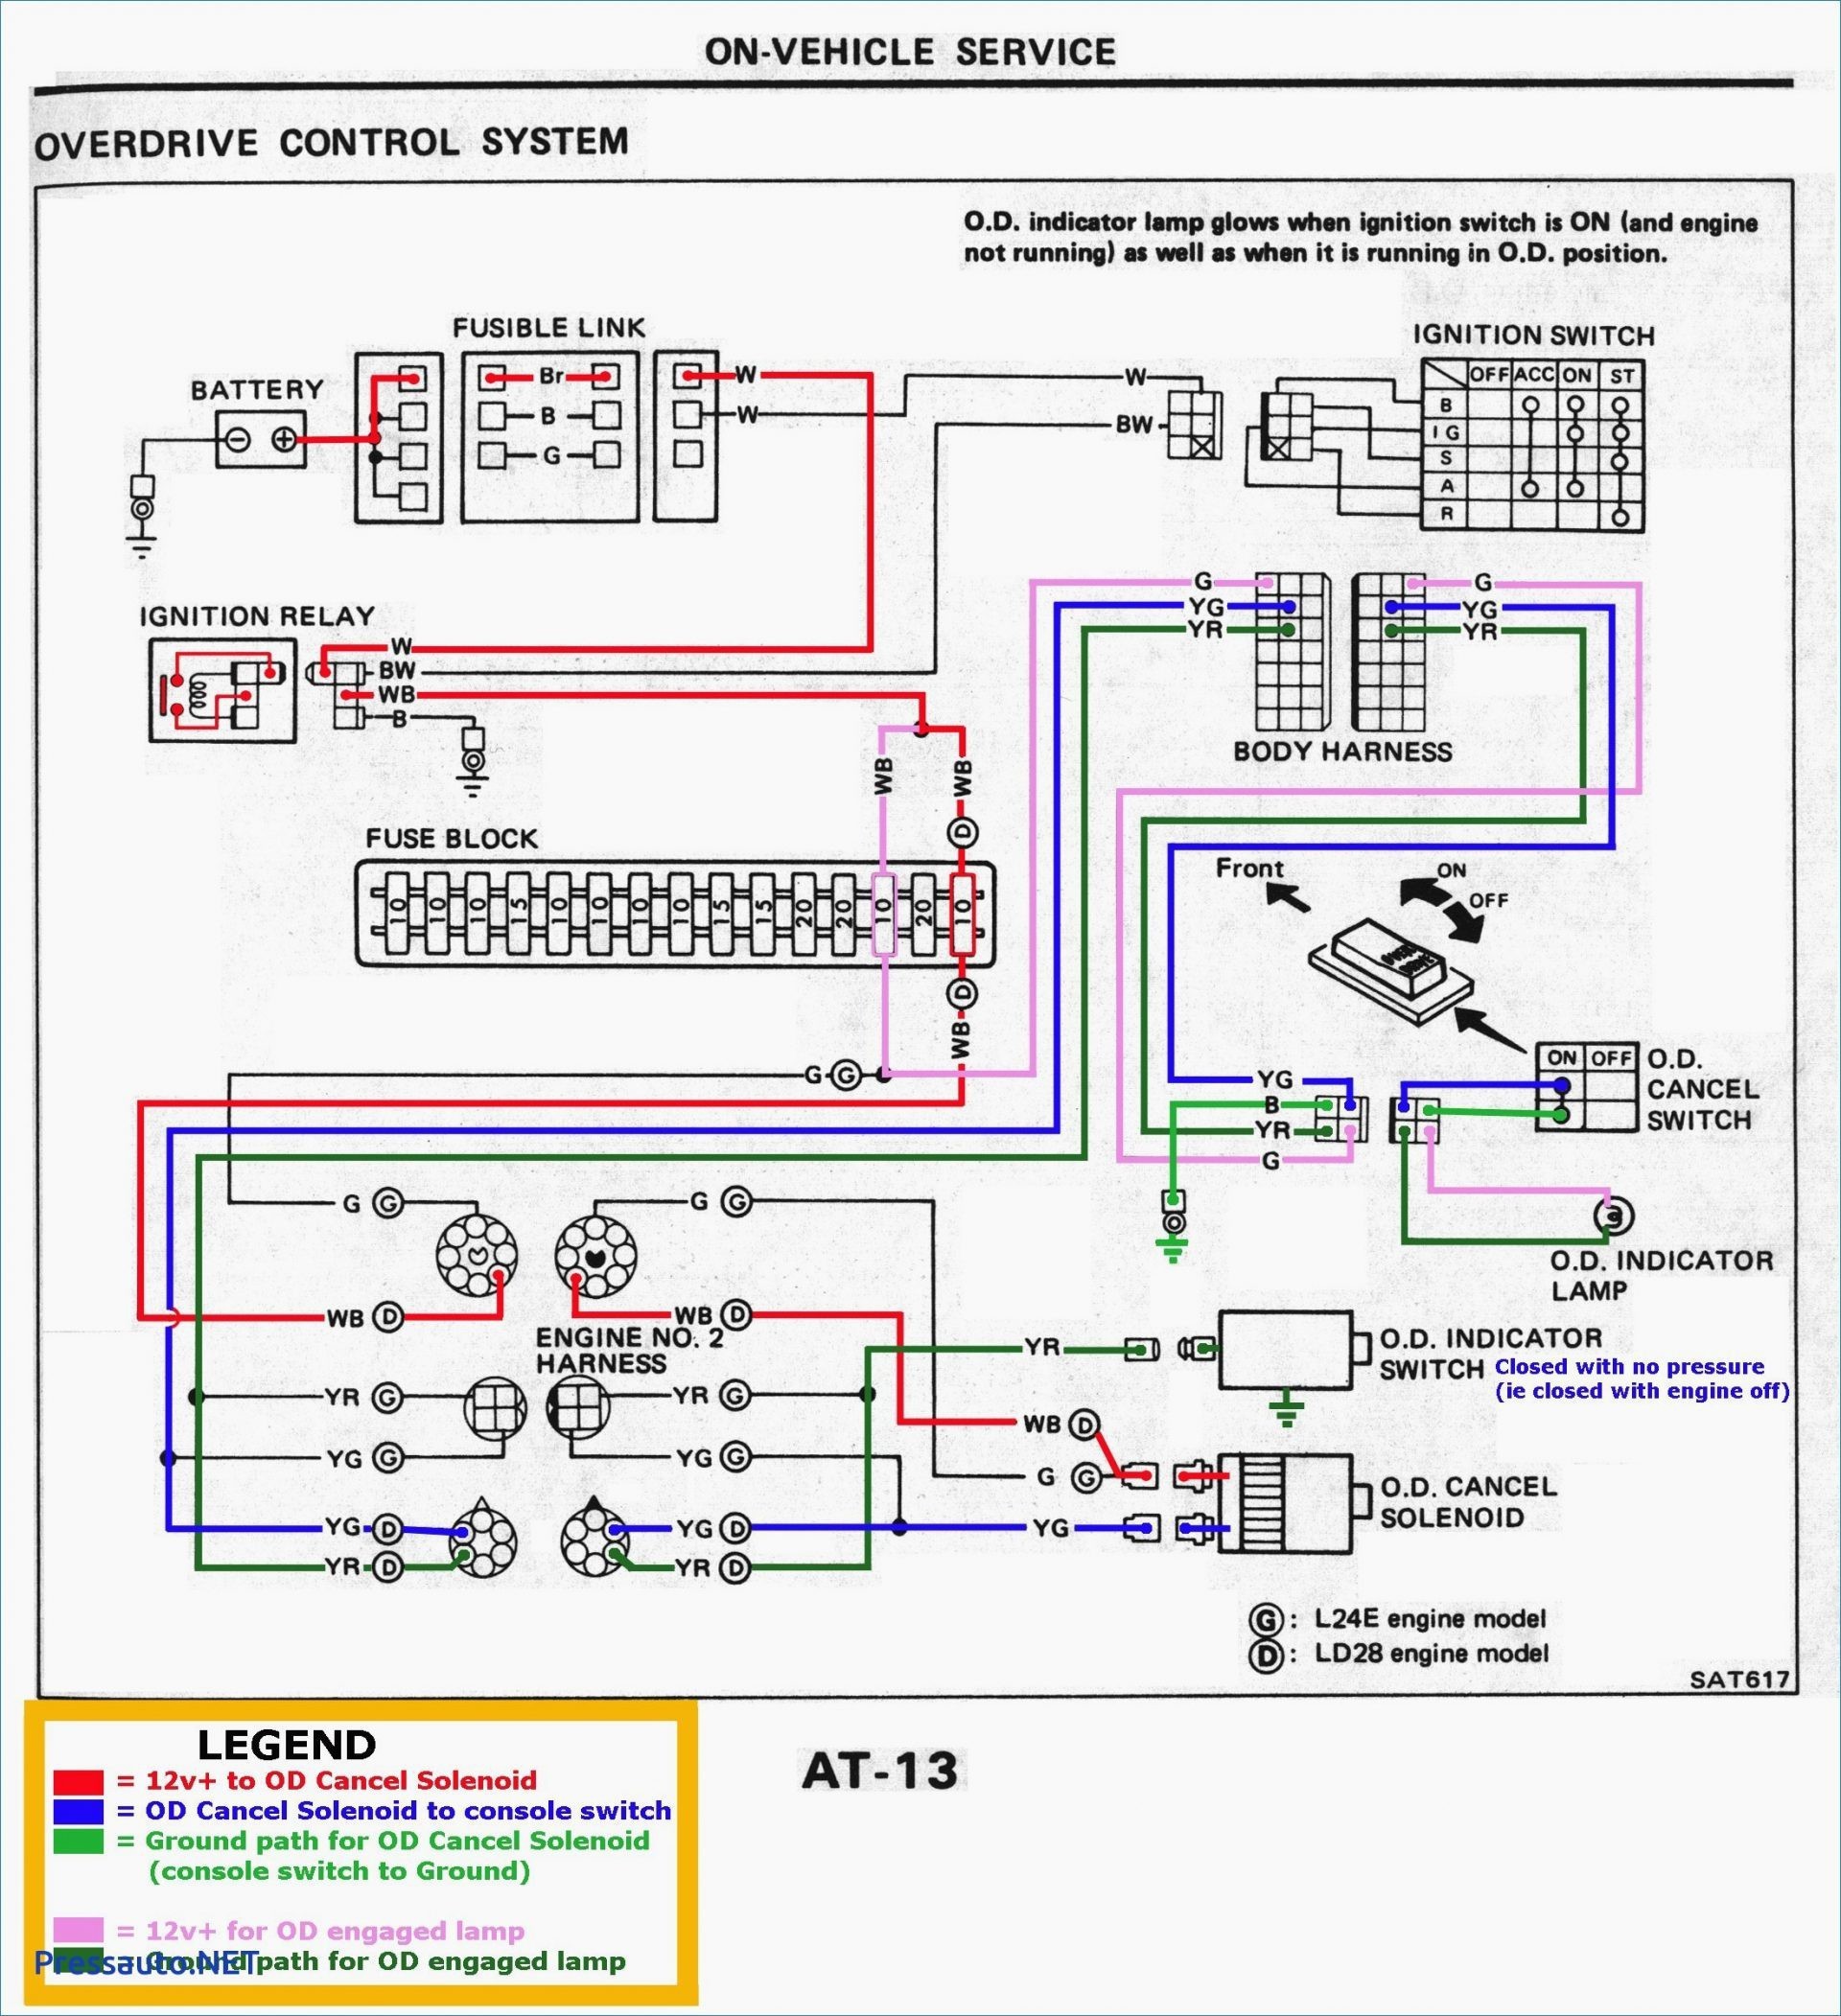 Wiring Diagram for A Relay for Fog Lights New Wiring Diagram for Fog Light Wiring